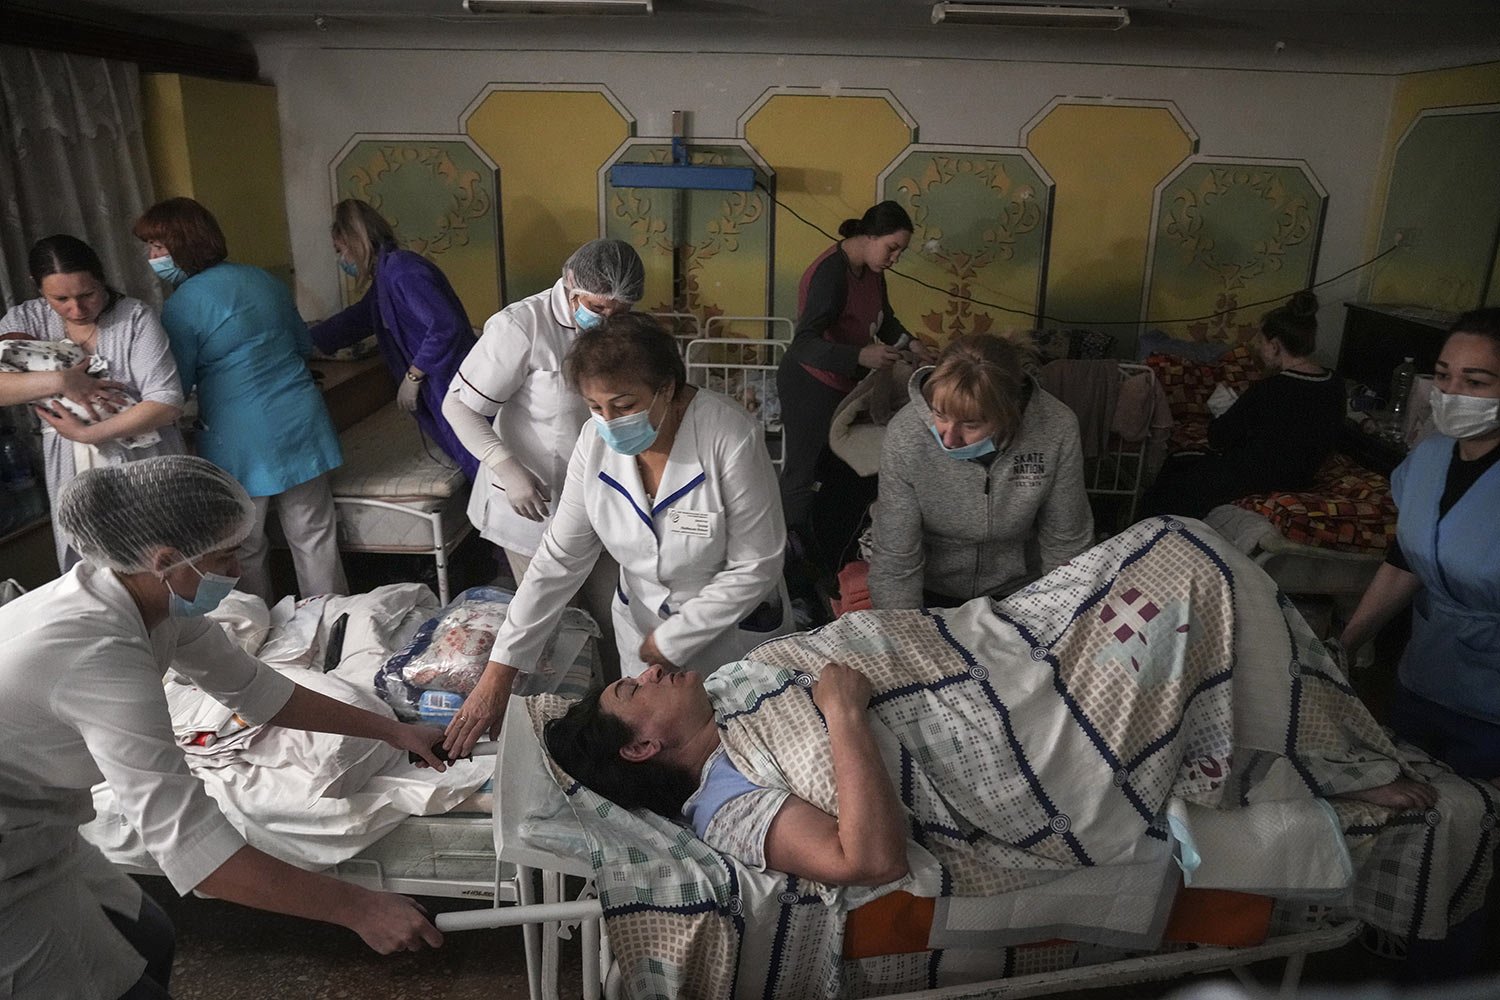  Medical workers move a patient in the basement of a maternity hospital that has been converted into a medical ward and bomb shelter in Mariupol, Ukraine, Tuesday, March 1, 2022. (AP Photo/Evgeniy Maloletka) 